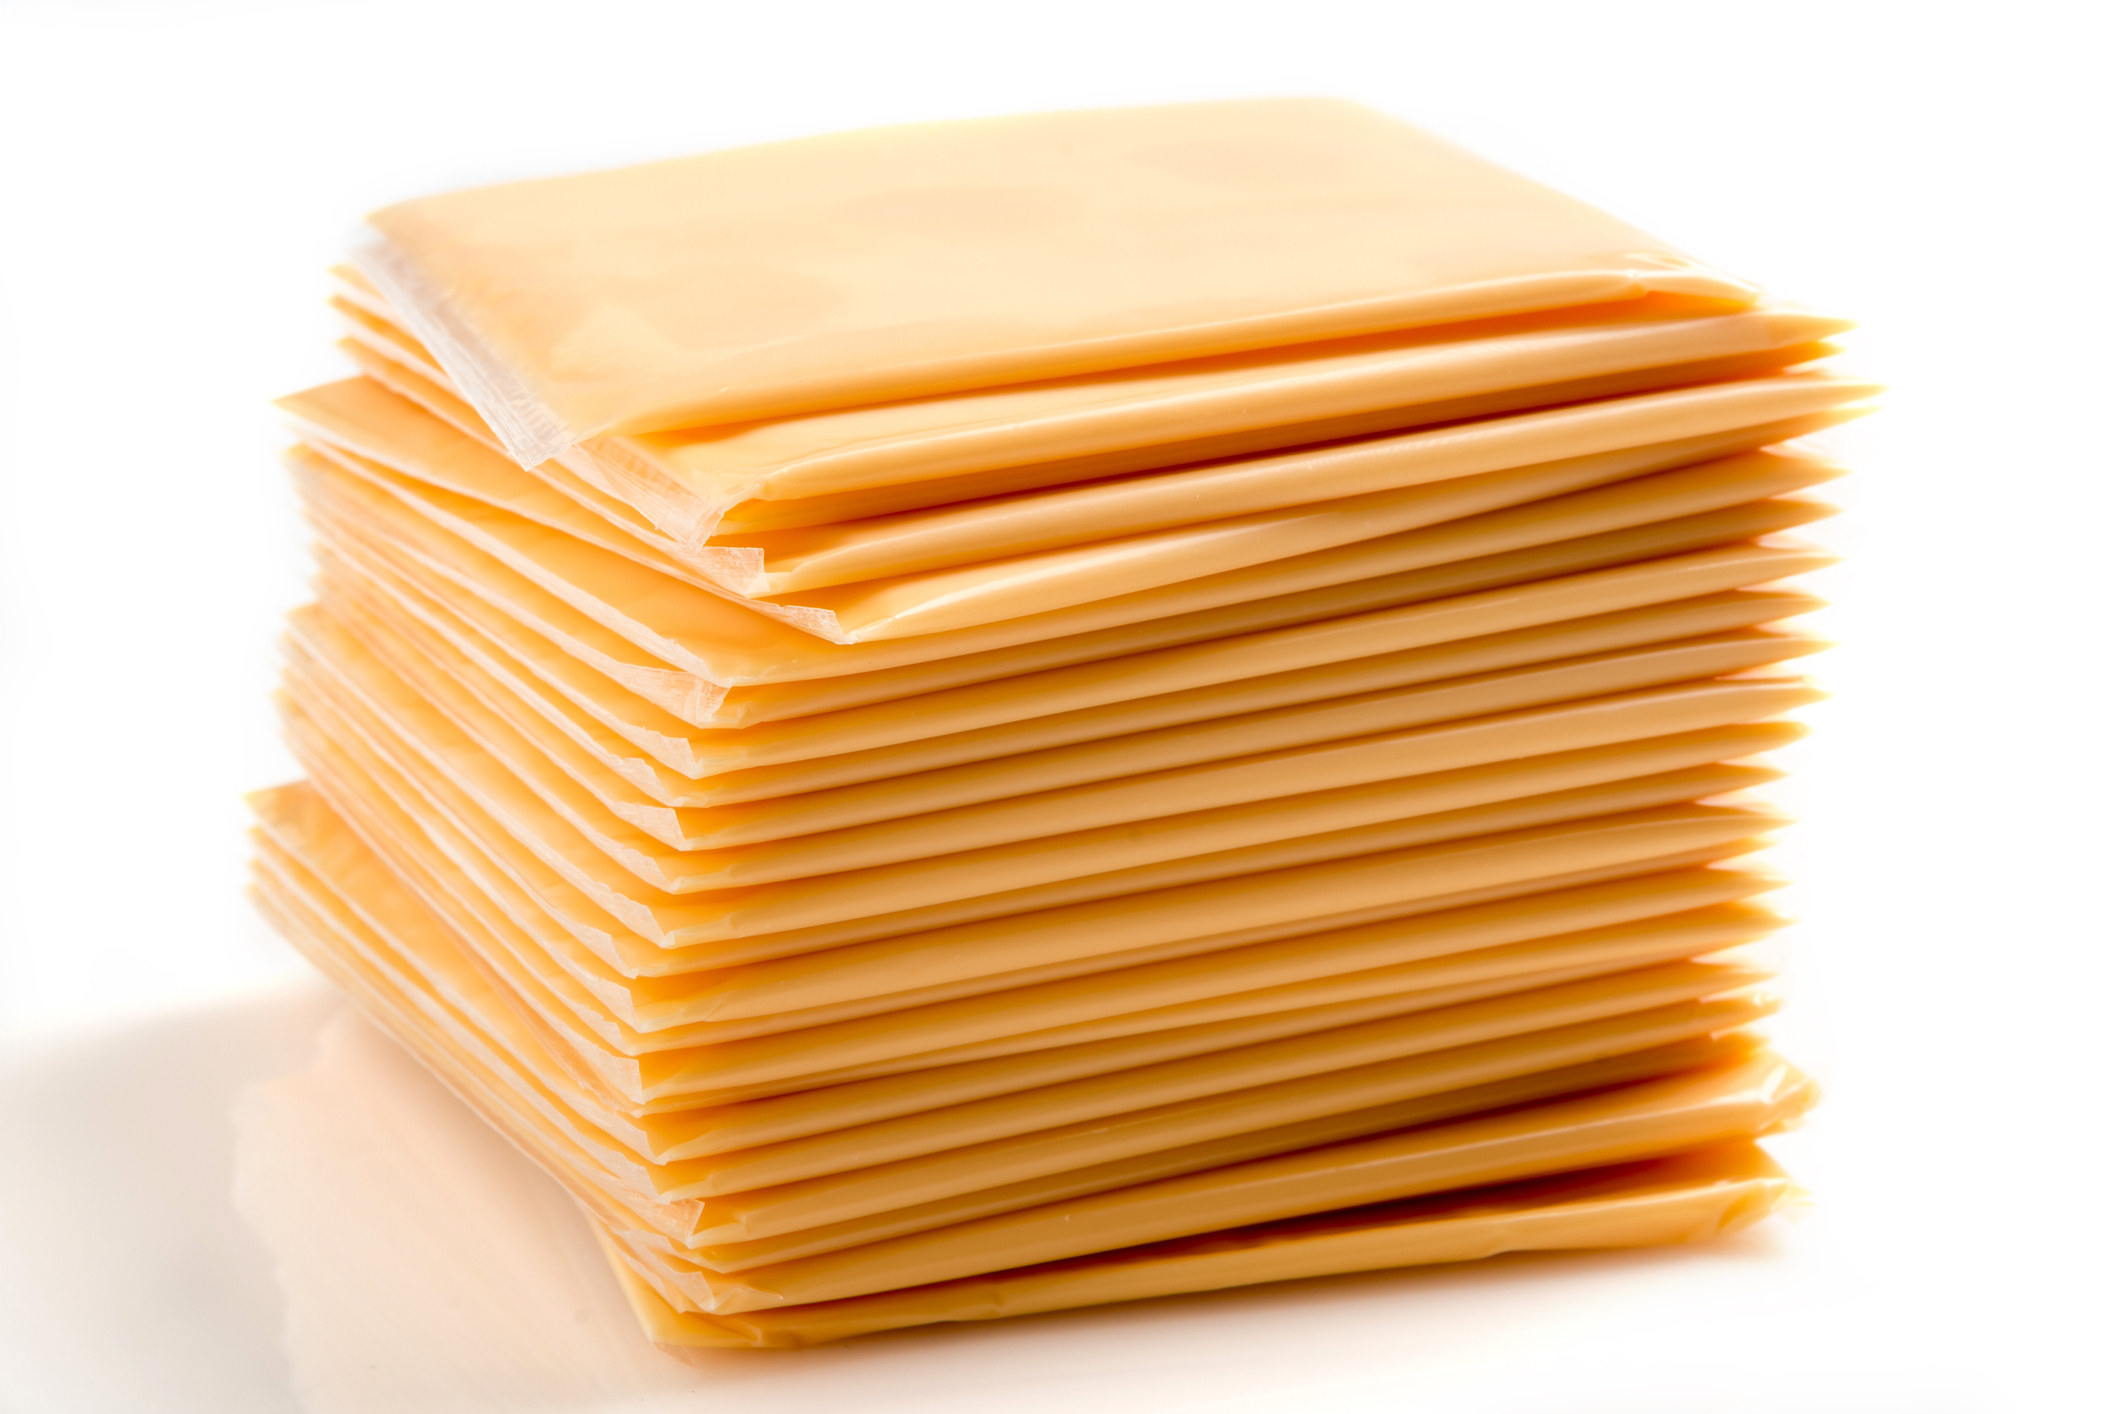 Sliced, packaged American cheese.